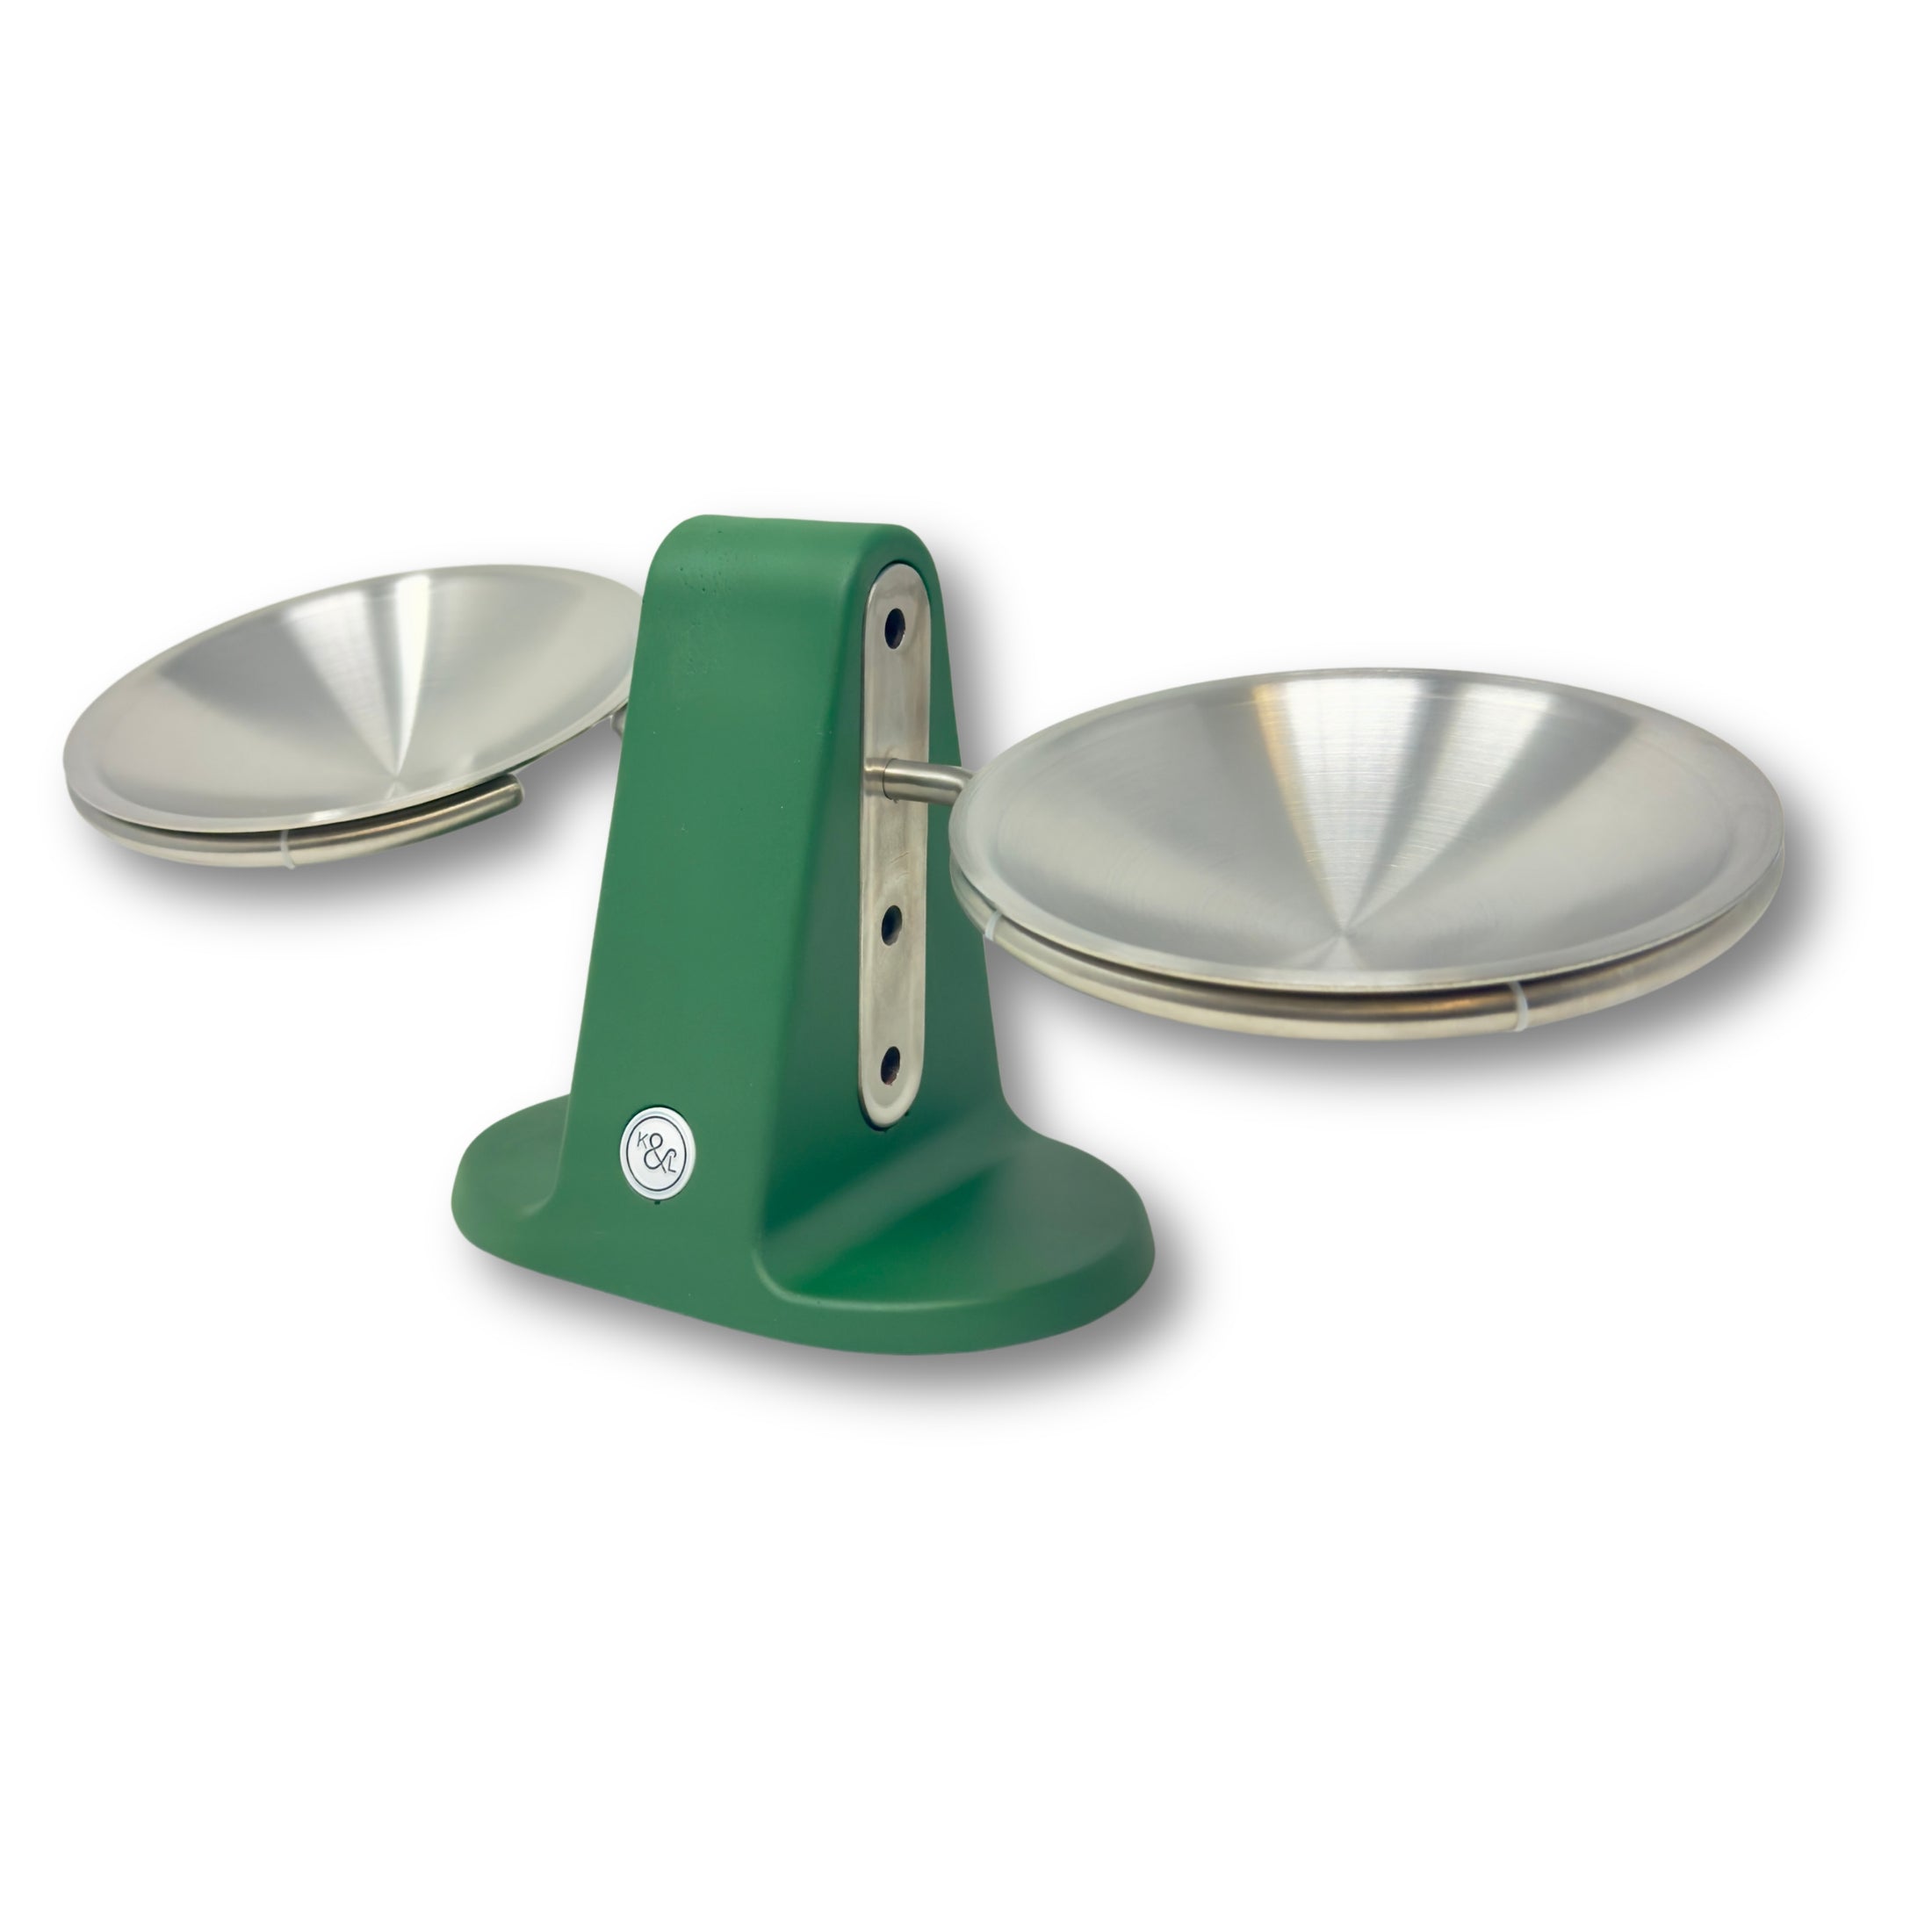 Dine Height Adjustable Cat Food Bowl Racing Green and Silver